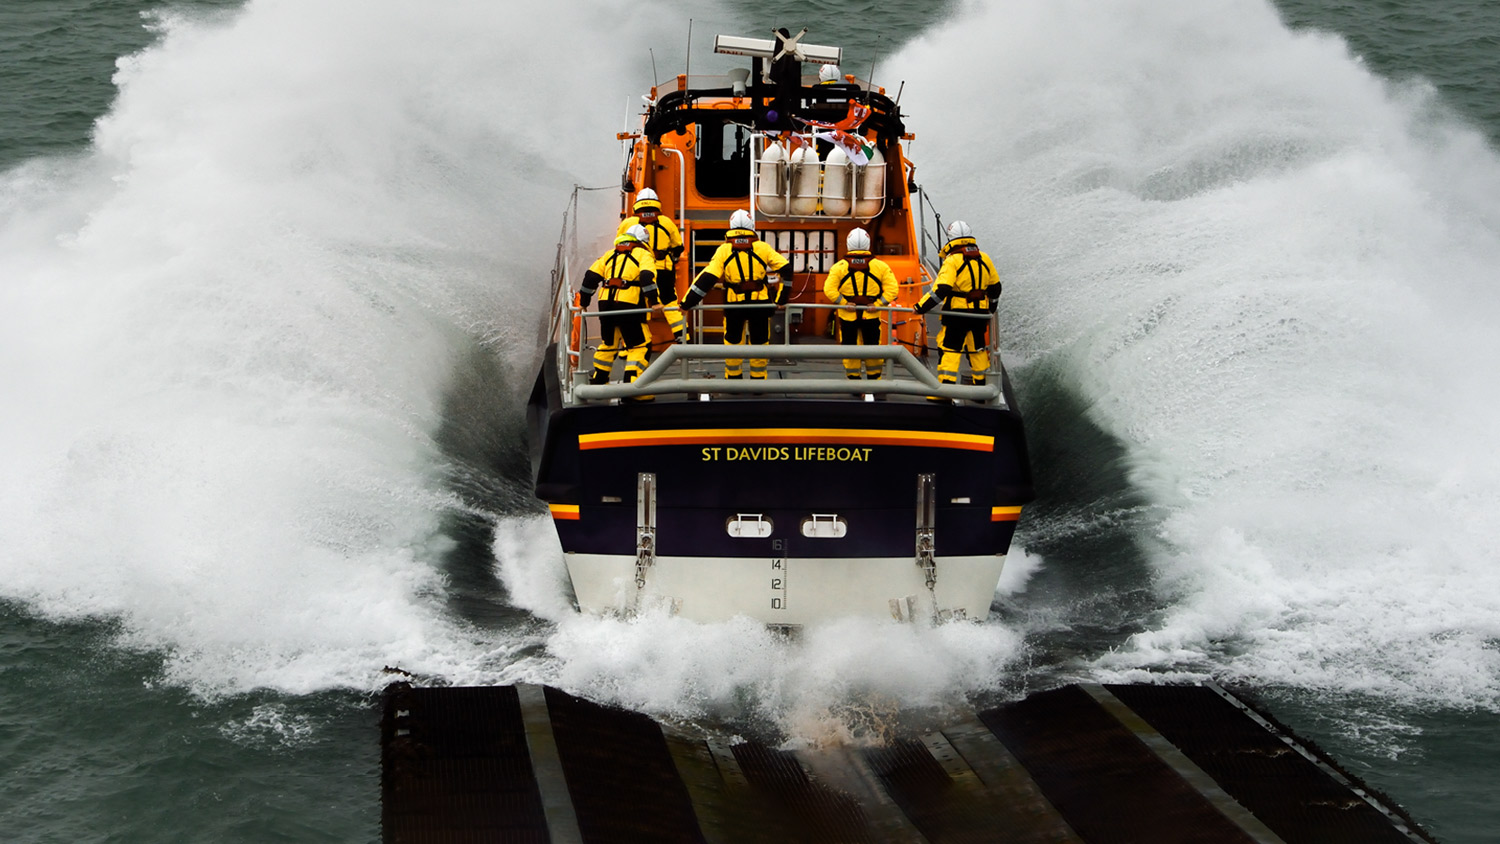 Tamar class lifeboat launches from slipway into the sea